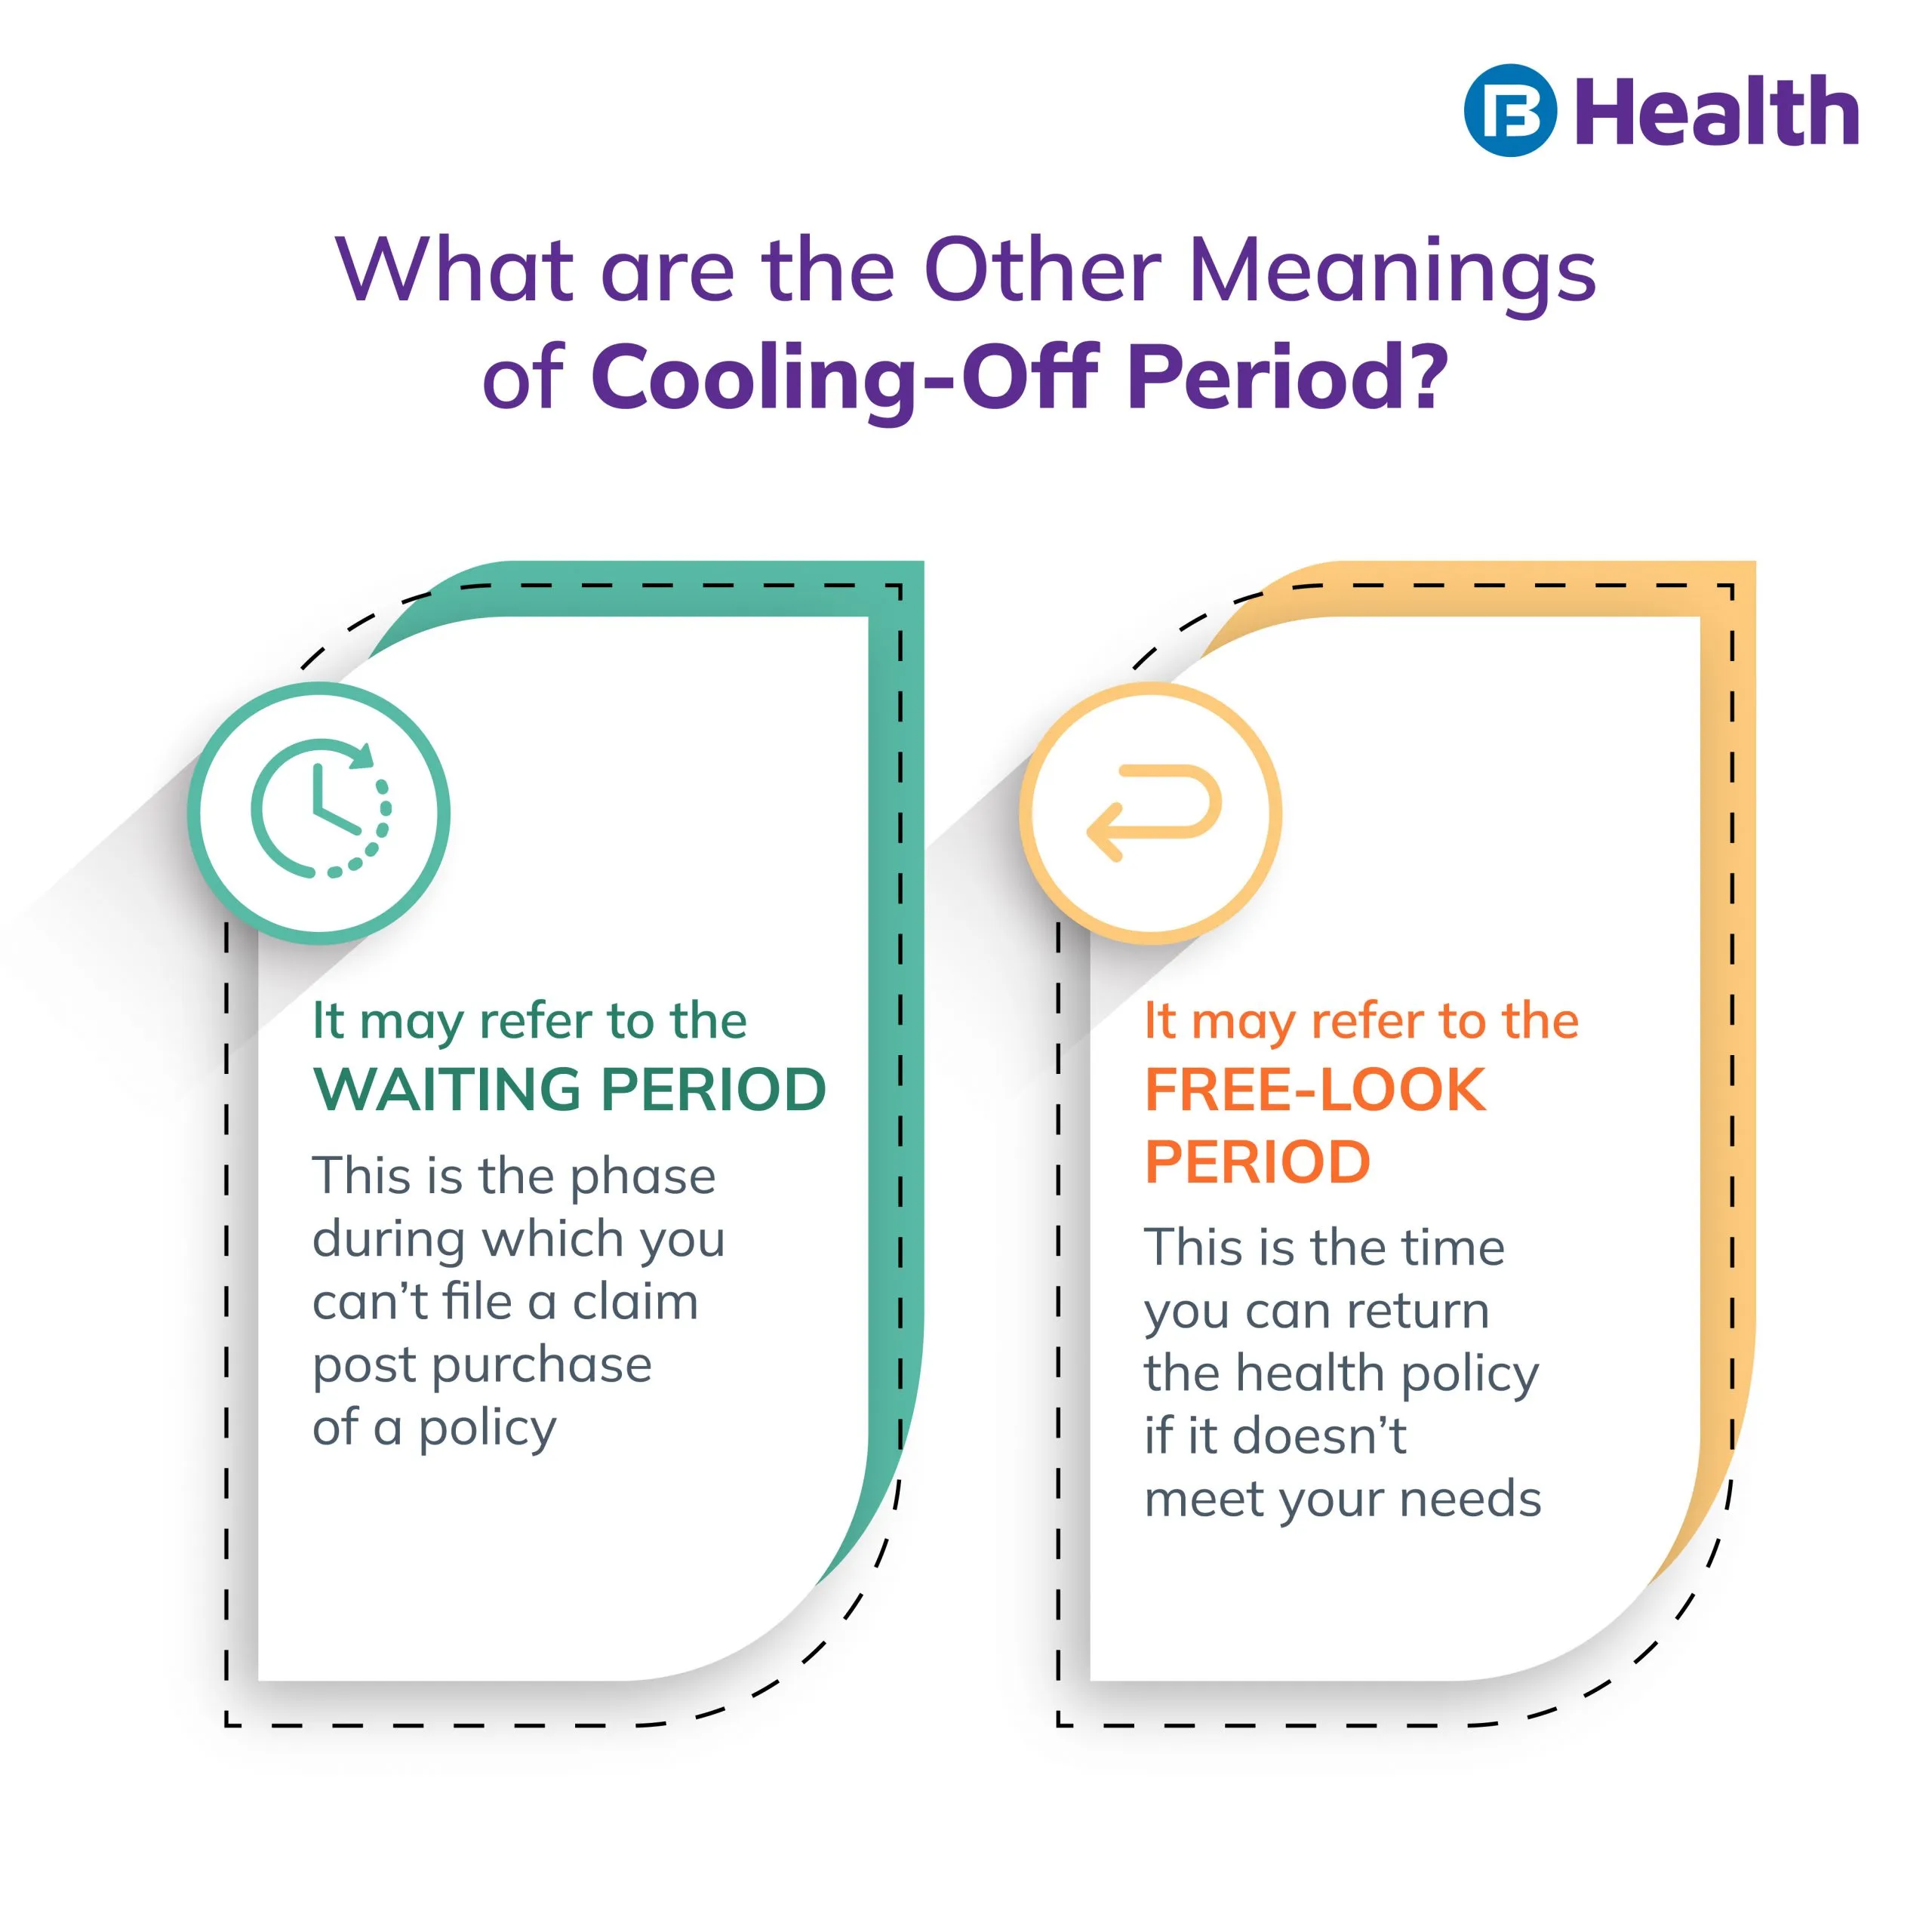 different meaning of Cooling-off Period